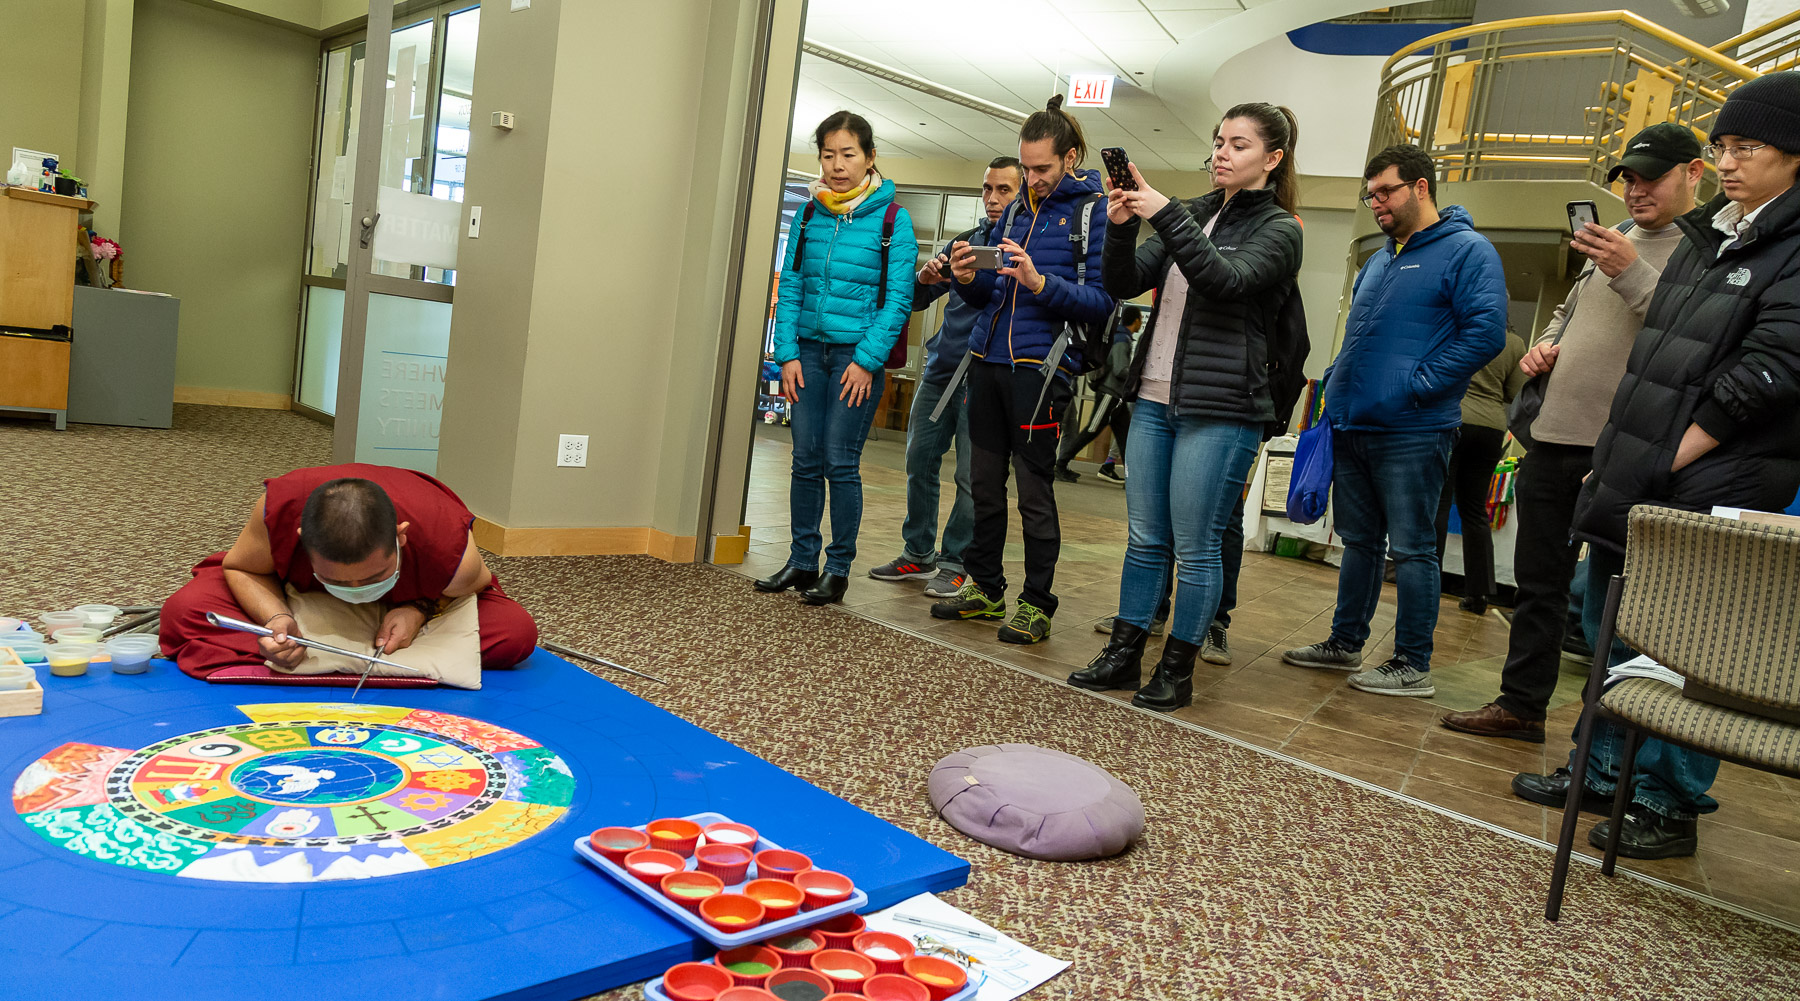 Onlookers watch a Buddhist monk create a sand mandala, Wednesday, Oct. 31, in the Lincoln Park Student Center. (DePaul University/Jeff Carrion)